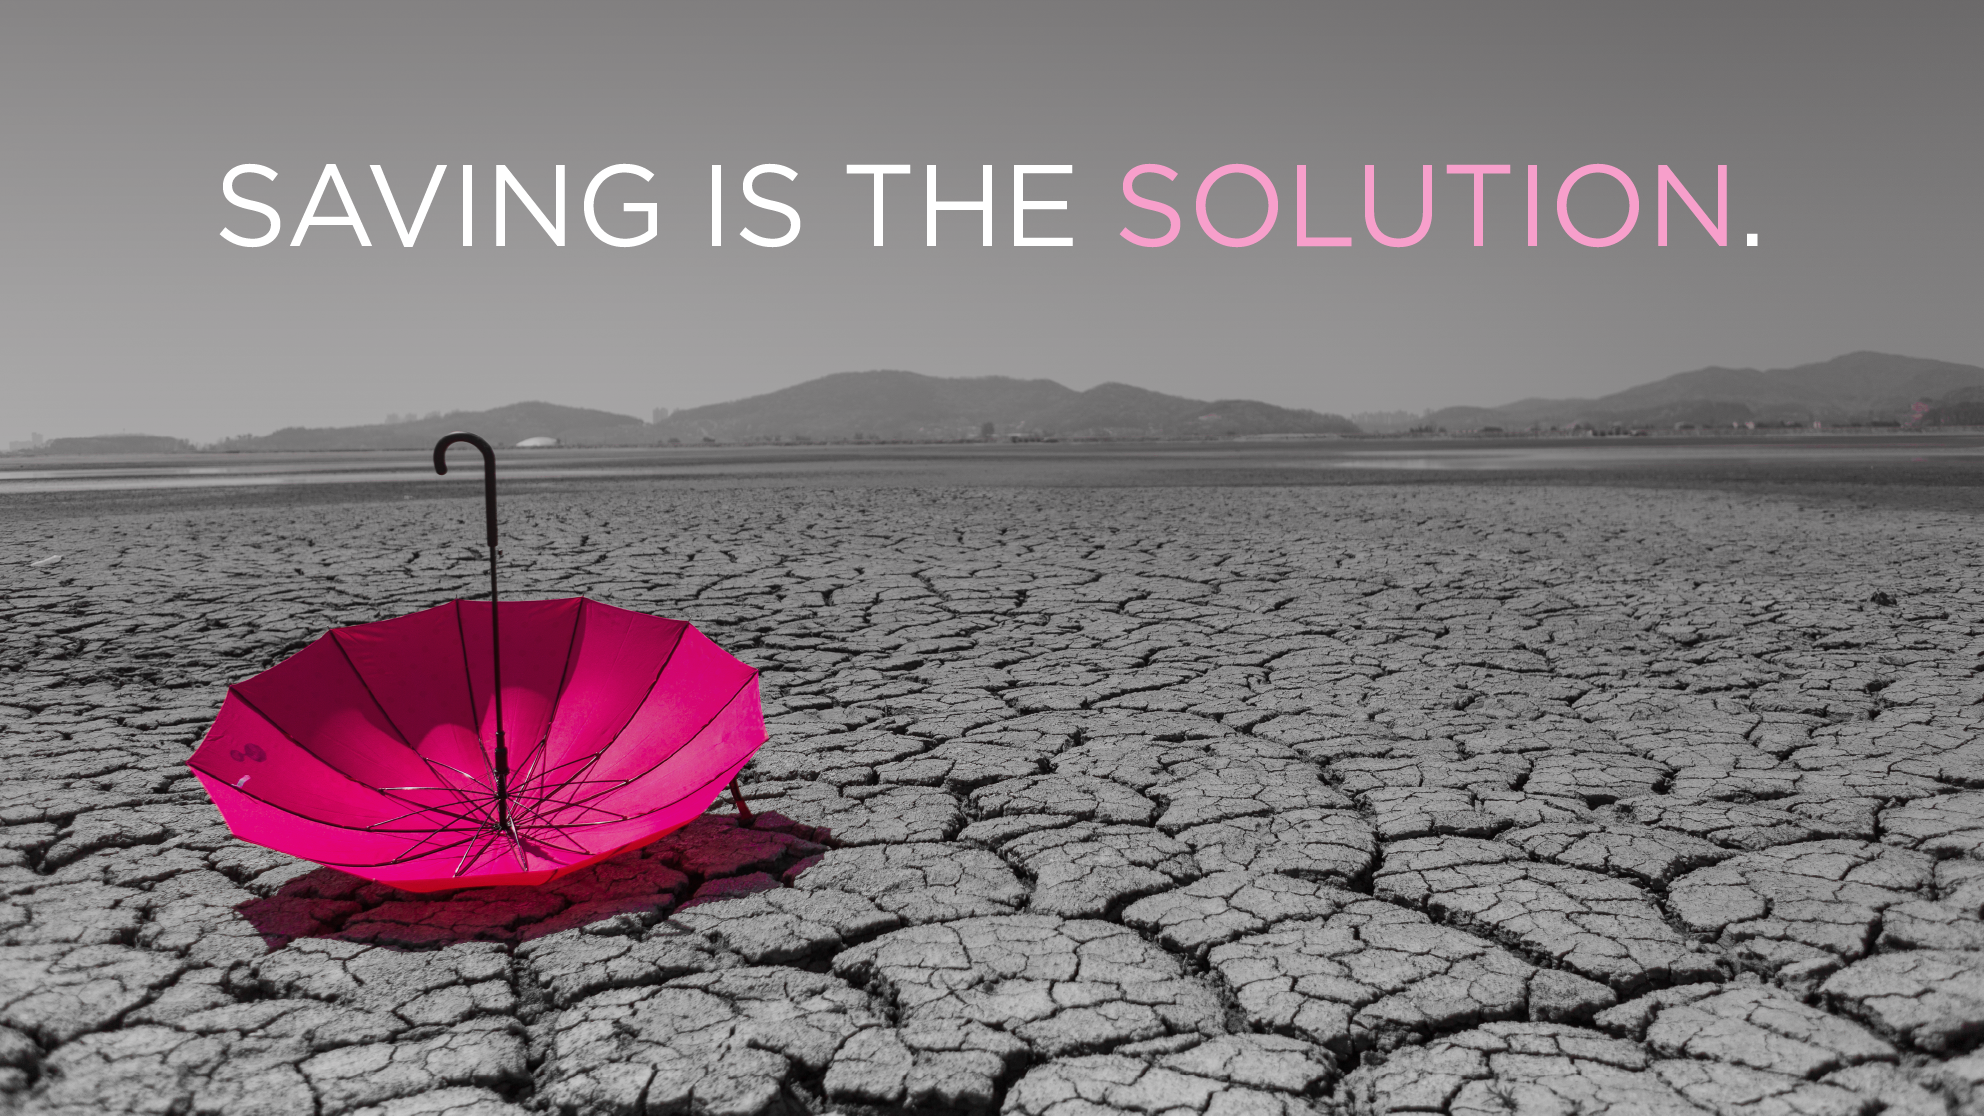 Dry cracked desert and a fallen umbrella. Text reads 'saving is the solution'